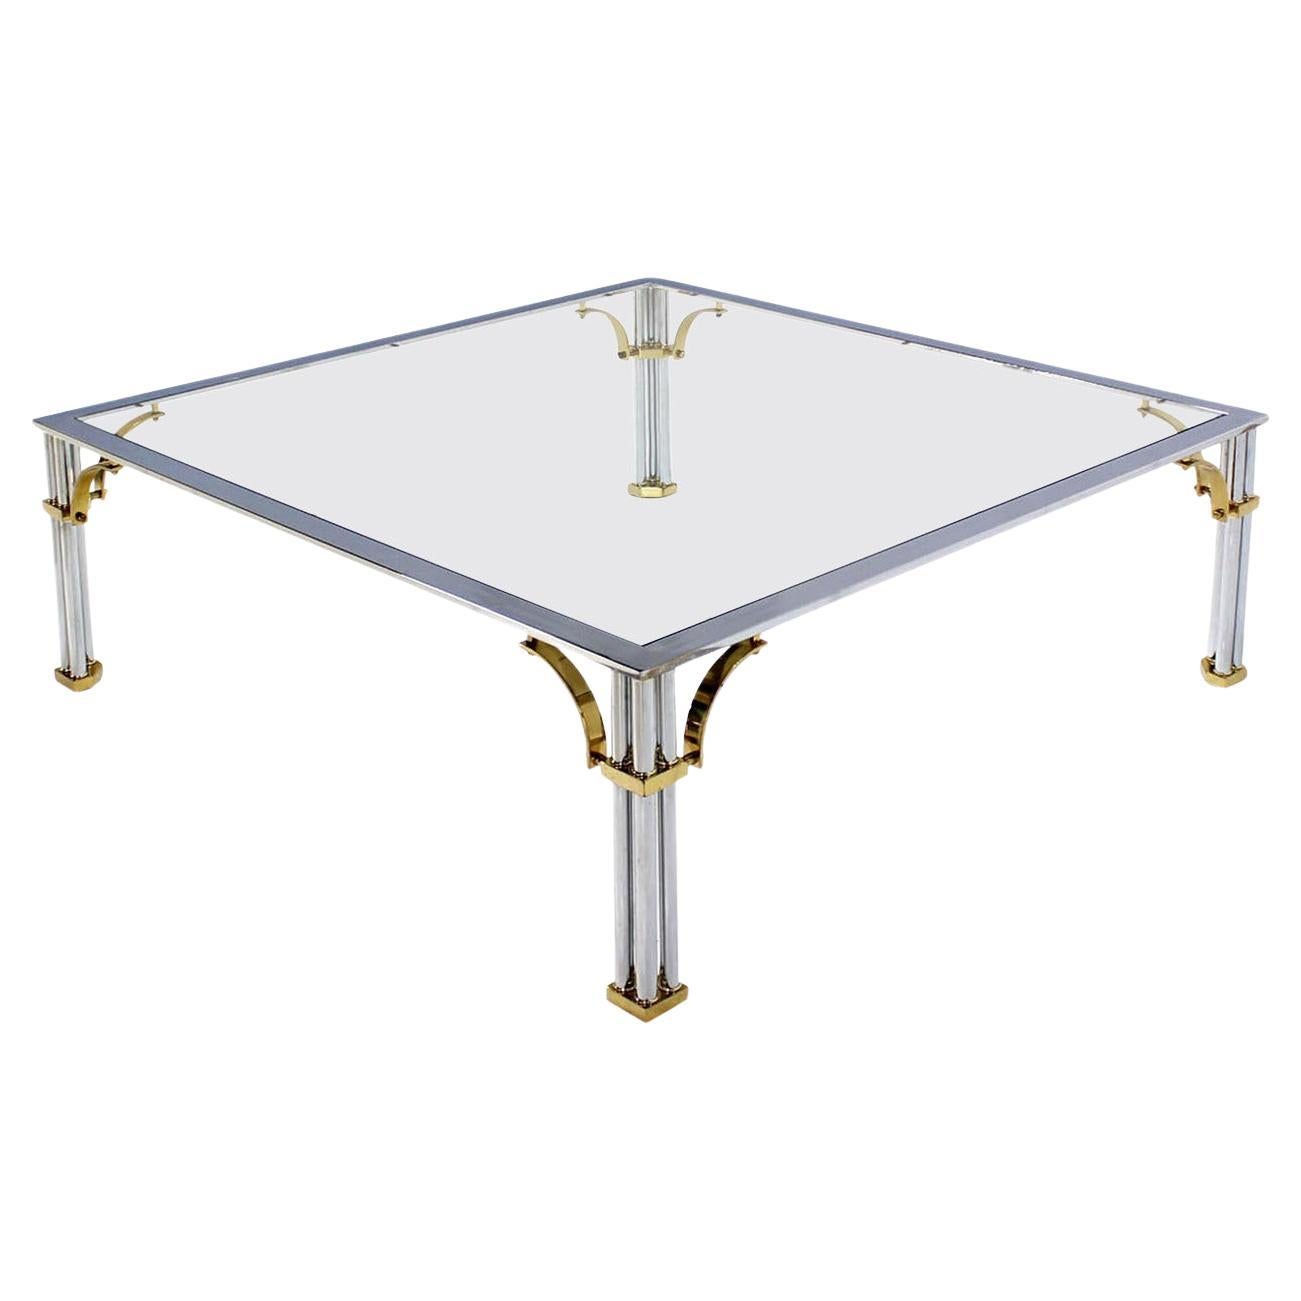 Large Square Italian Mid Century Modern Brass Chrome Glass Top Coffee Table MINT For Sale